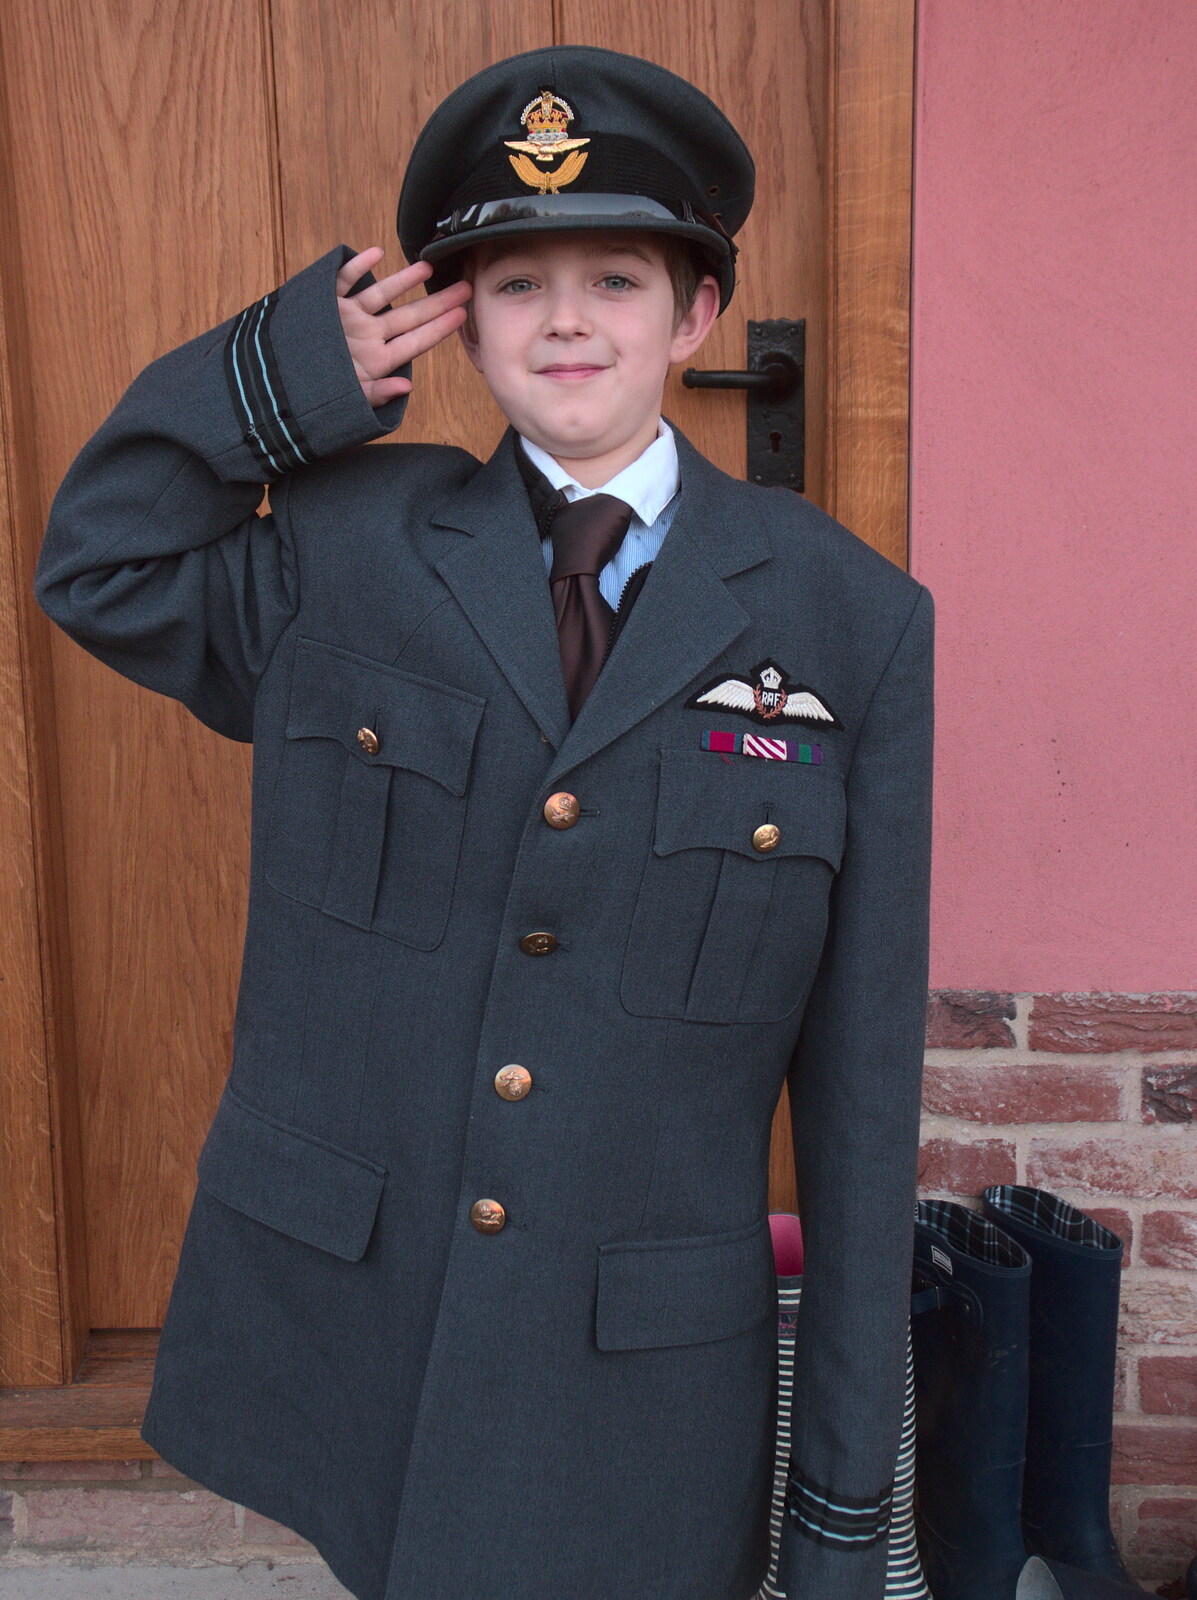 Fred sticks on an RAF uniform for school from A Spot of Christmas Shopping, Norwich, Norfolk - 16th December 2018